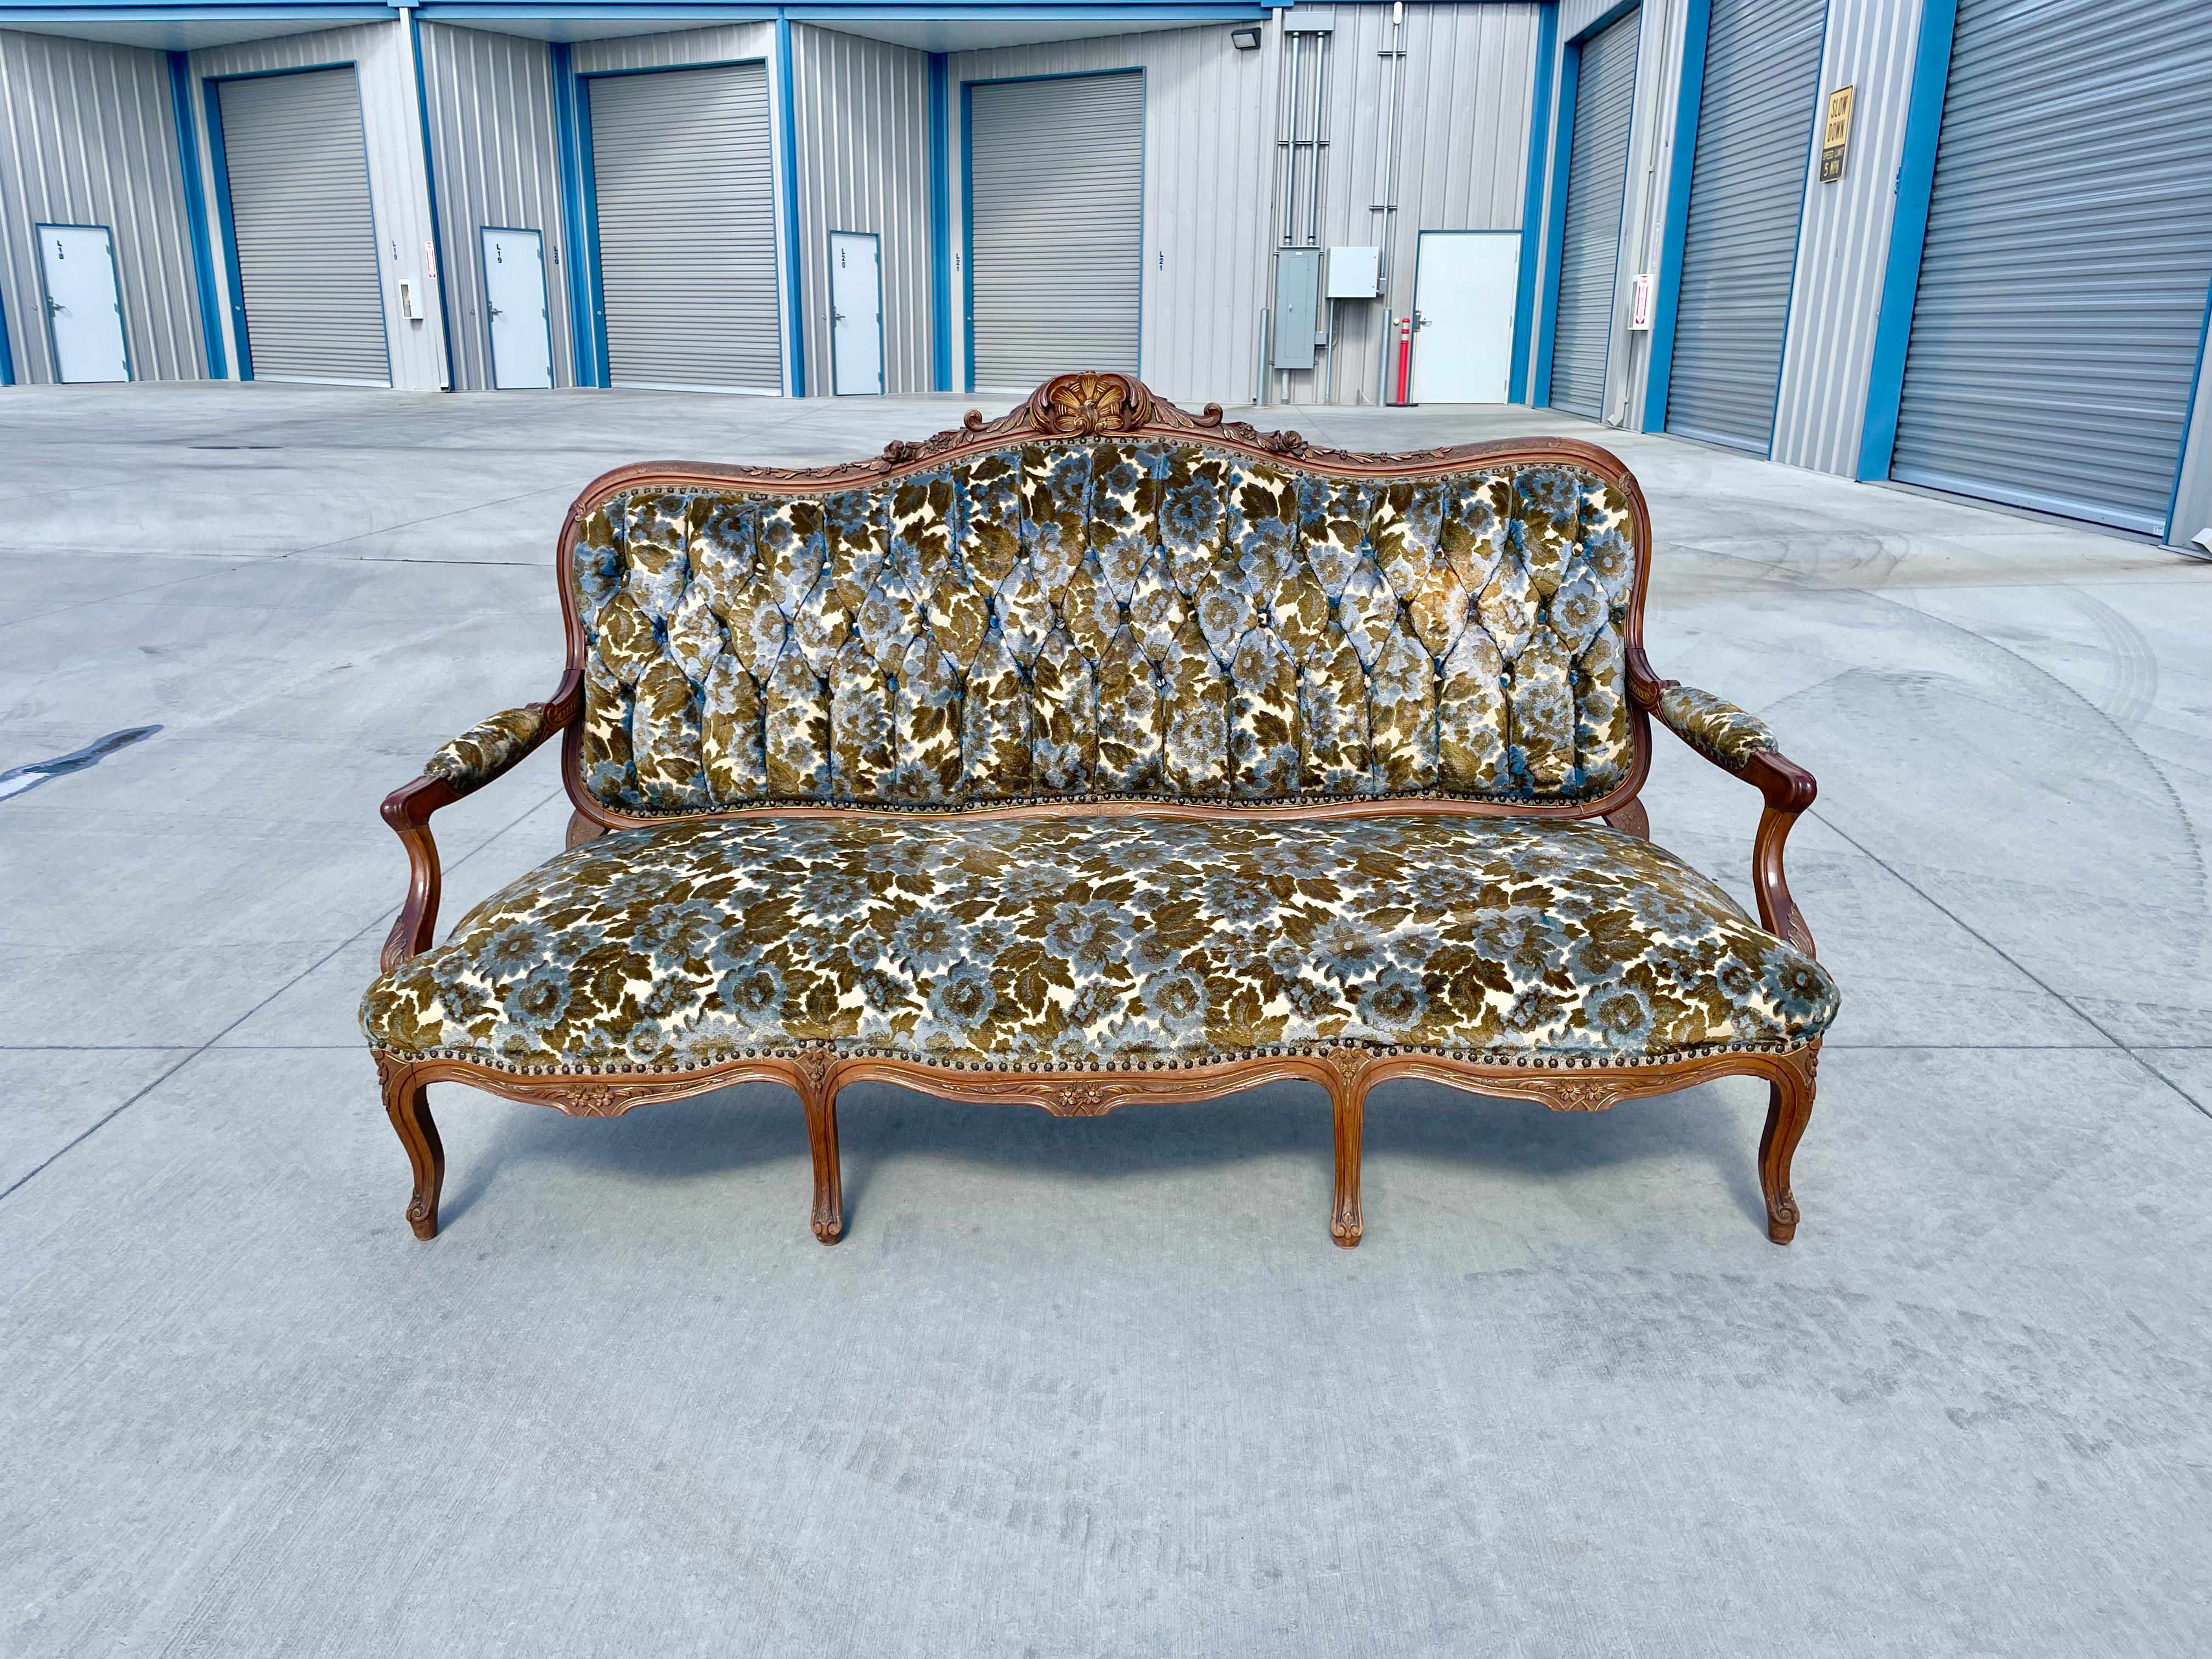 Vintage sofa was designed and manufactured in France circa the early 20th century. This beautiful sofa was styled after Louis XV; it features an oak frame with beautiful sculptural design surrounding the piece. The sofa also has flower pattern